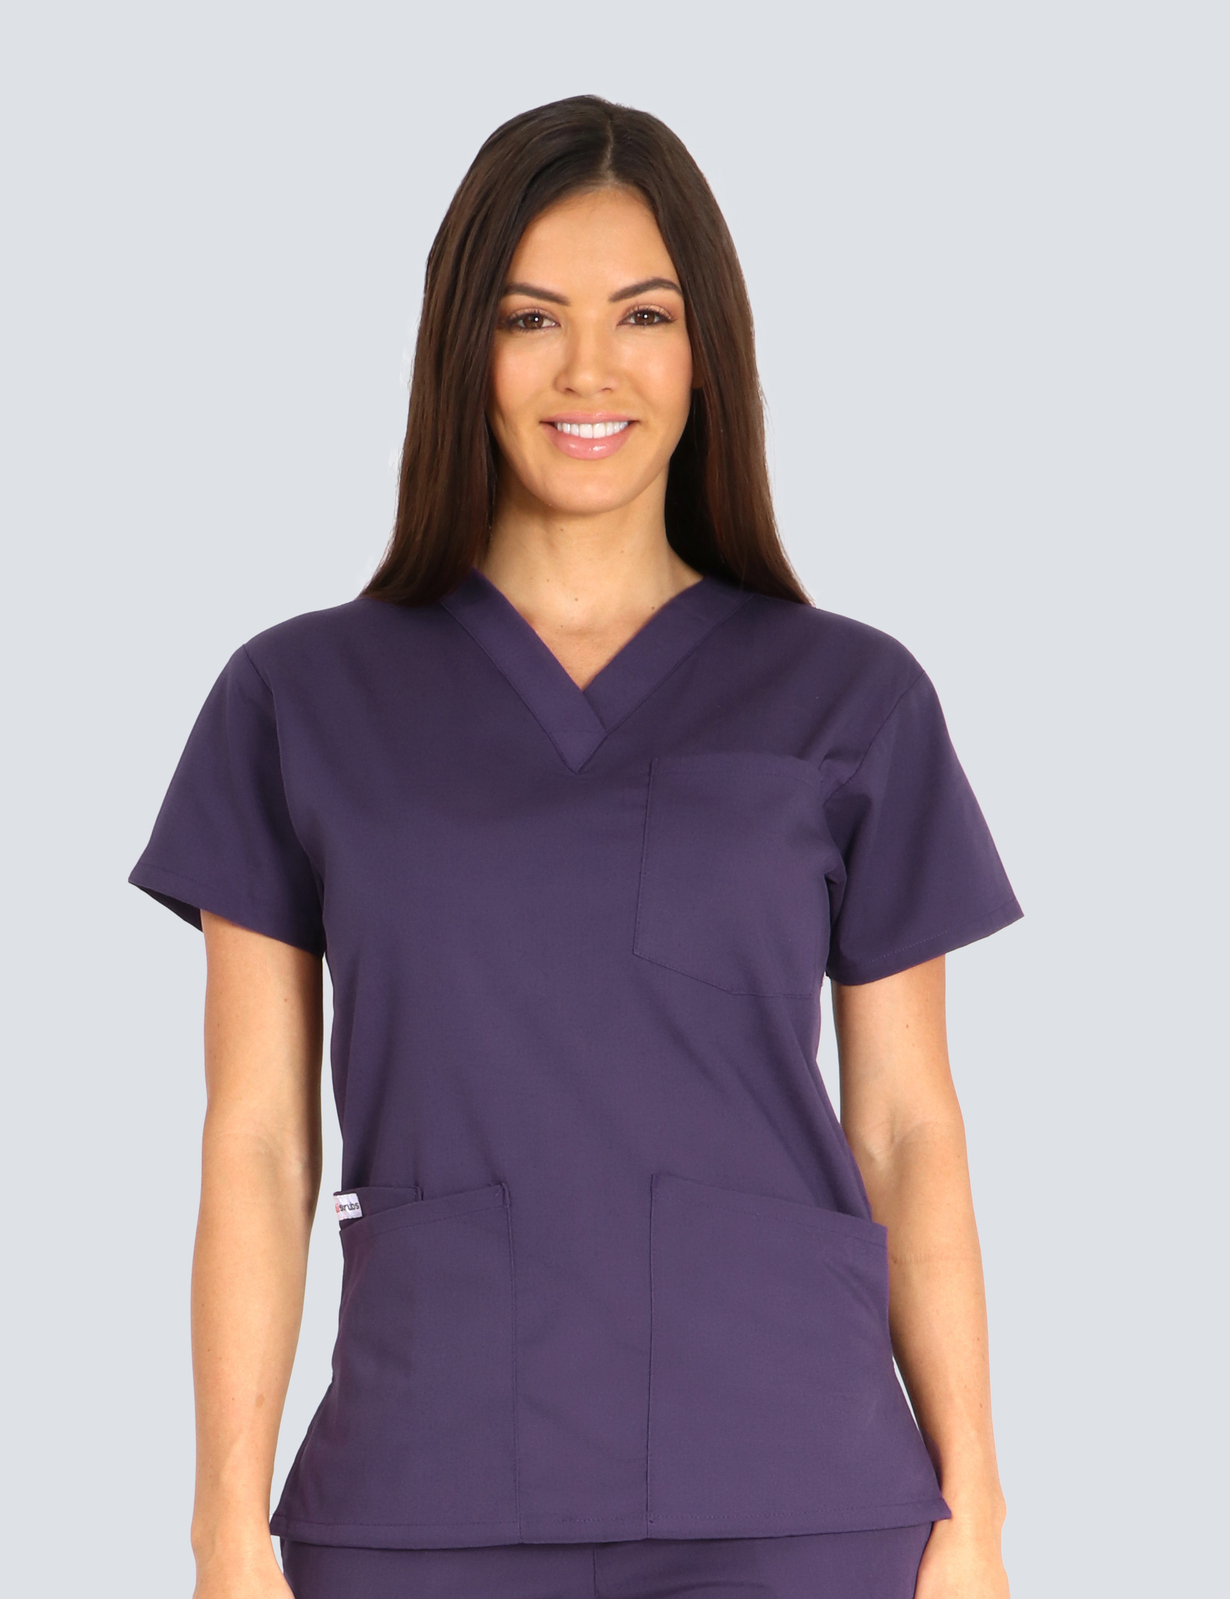 The Park - Centre for Mental Health - Pharmacy Top only Bundle (4 Pocket Top incl Logo)